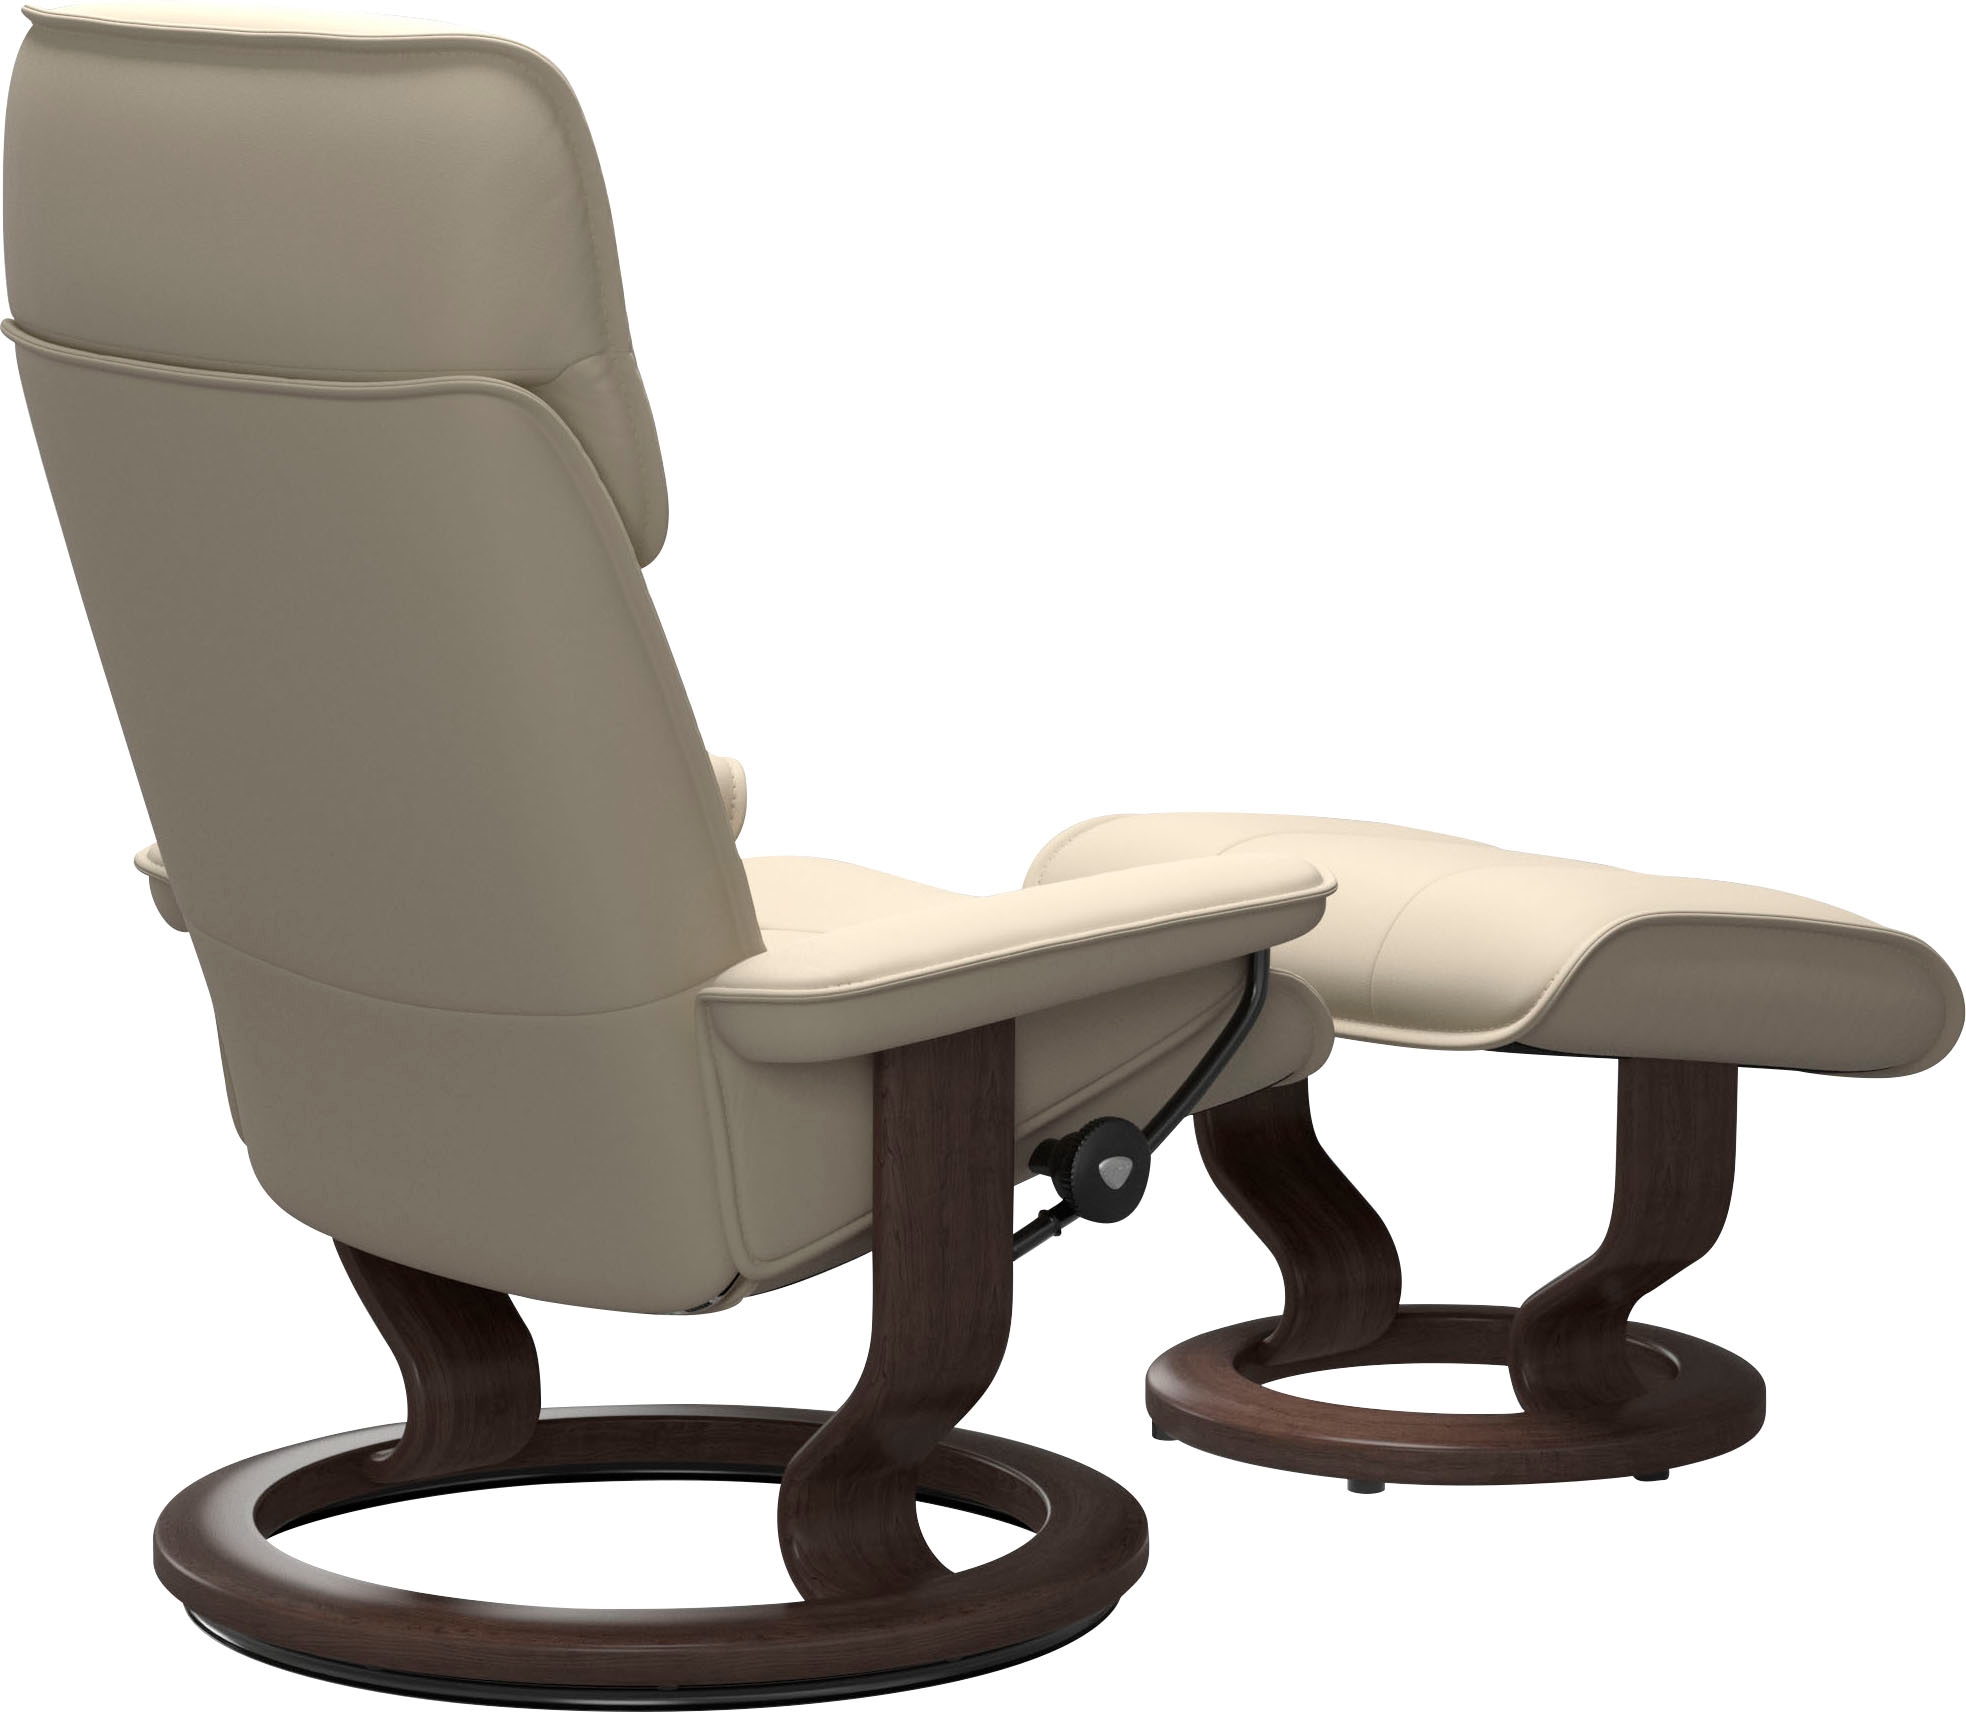 M OTTO Relaxsessel Base, (Set, Wenge Relaxsessel Größe mit Hocker), Stressless® Online »Admiral«, L, & Classic Gestell Shop inkl.